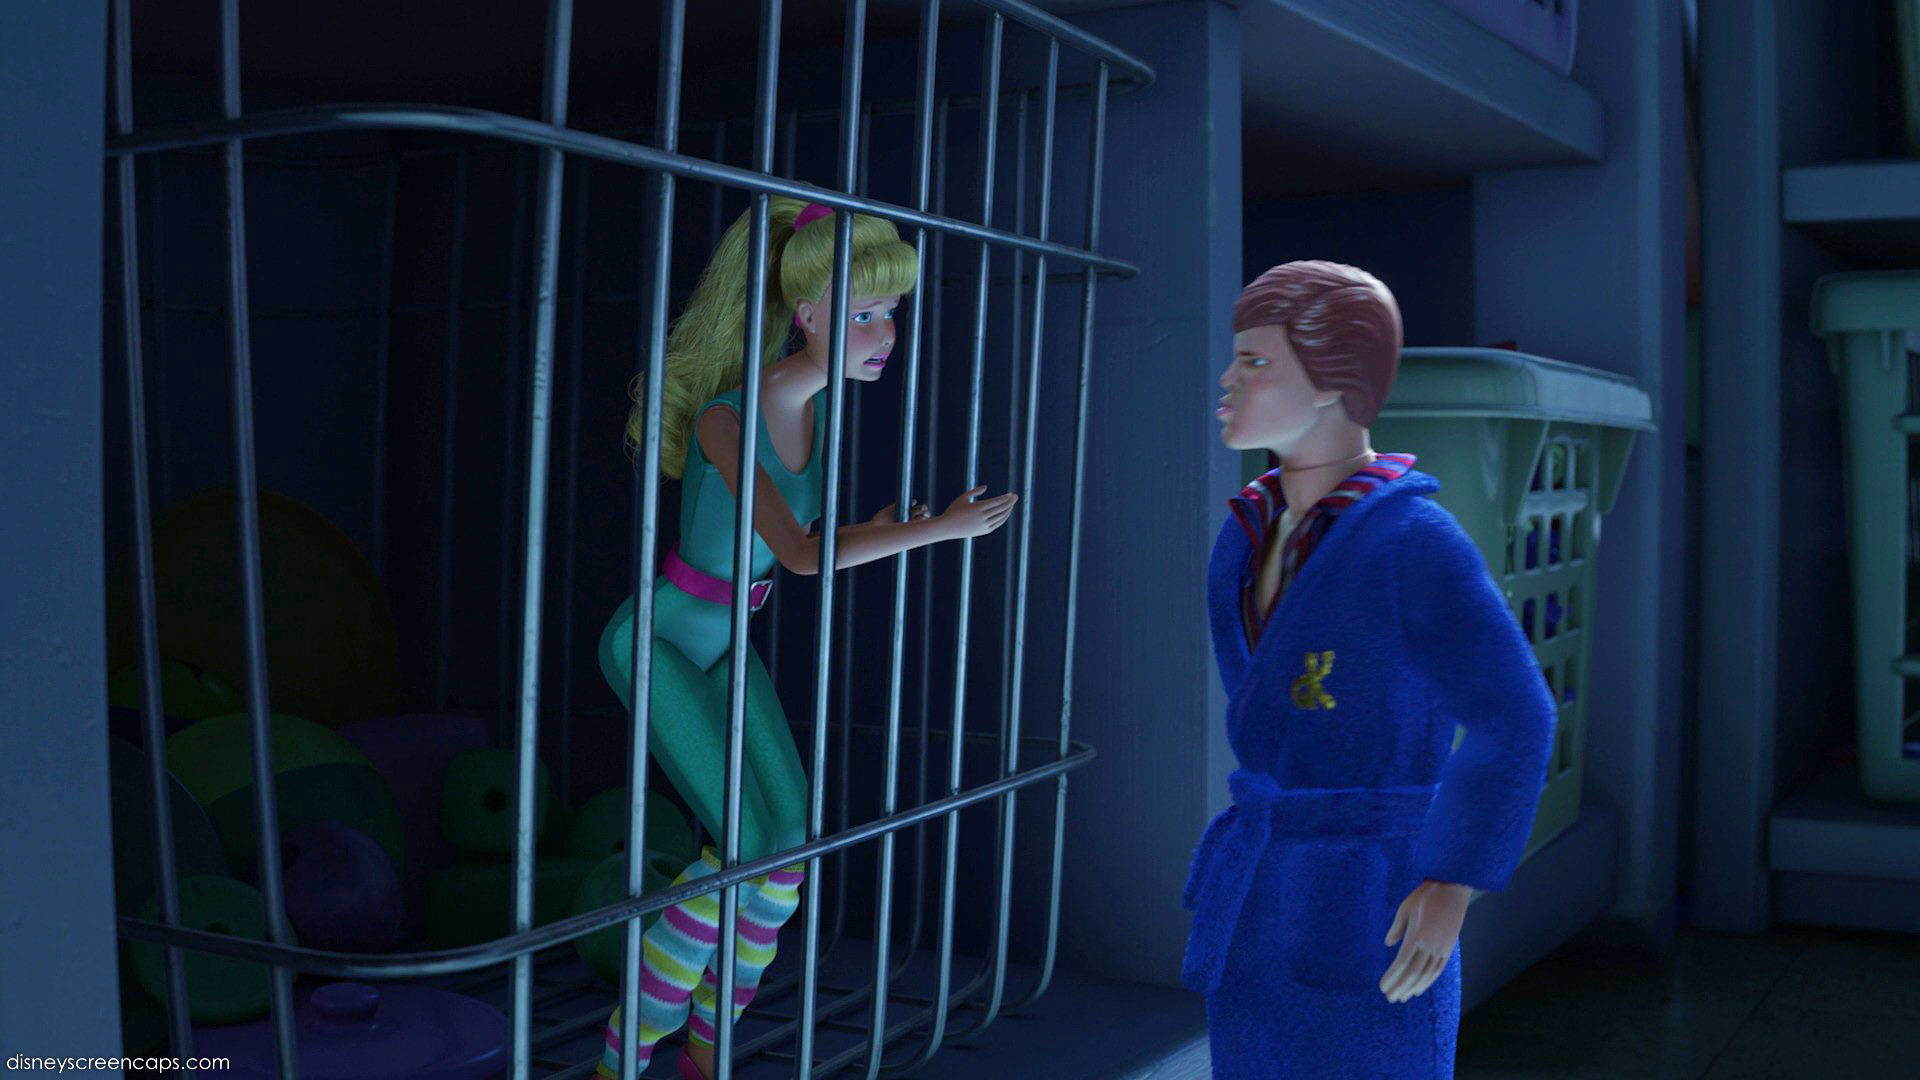 1920x1080 Pixar Couples images Barbie talks to Ken in jail HD wallpaper and  background photos